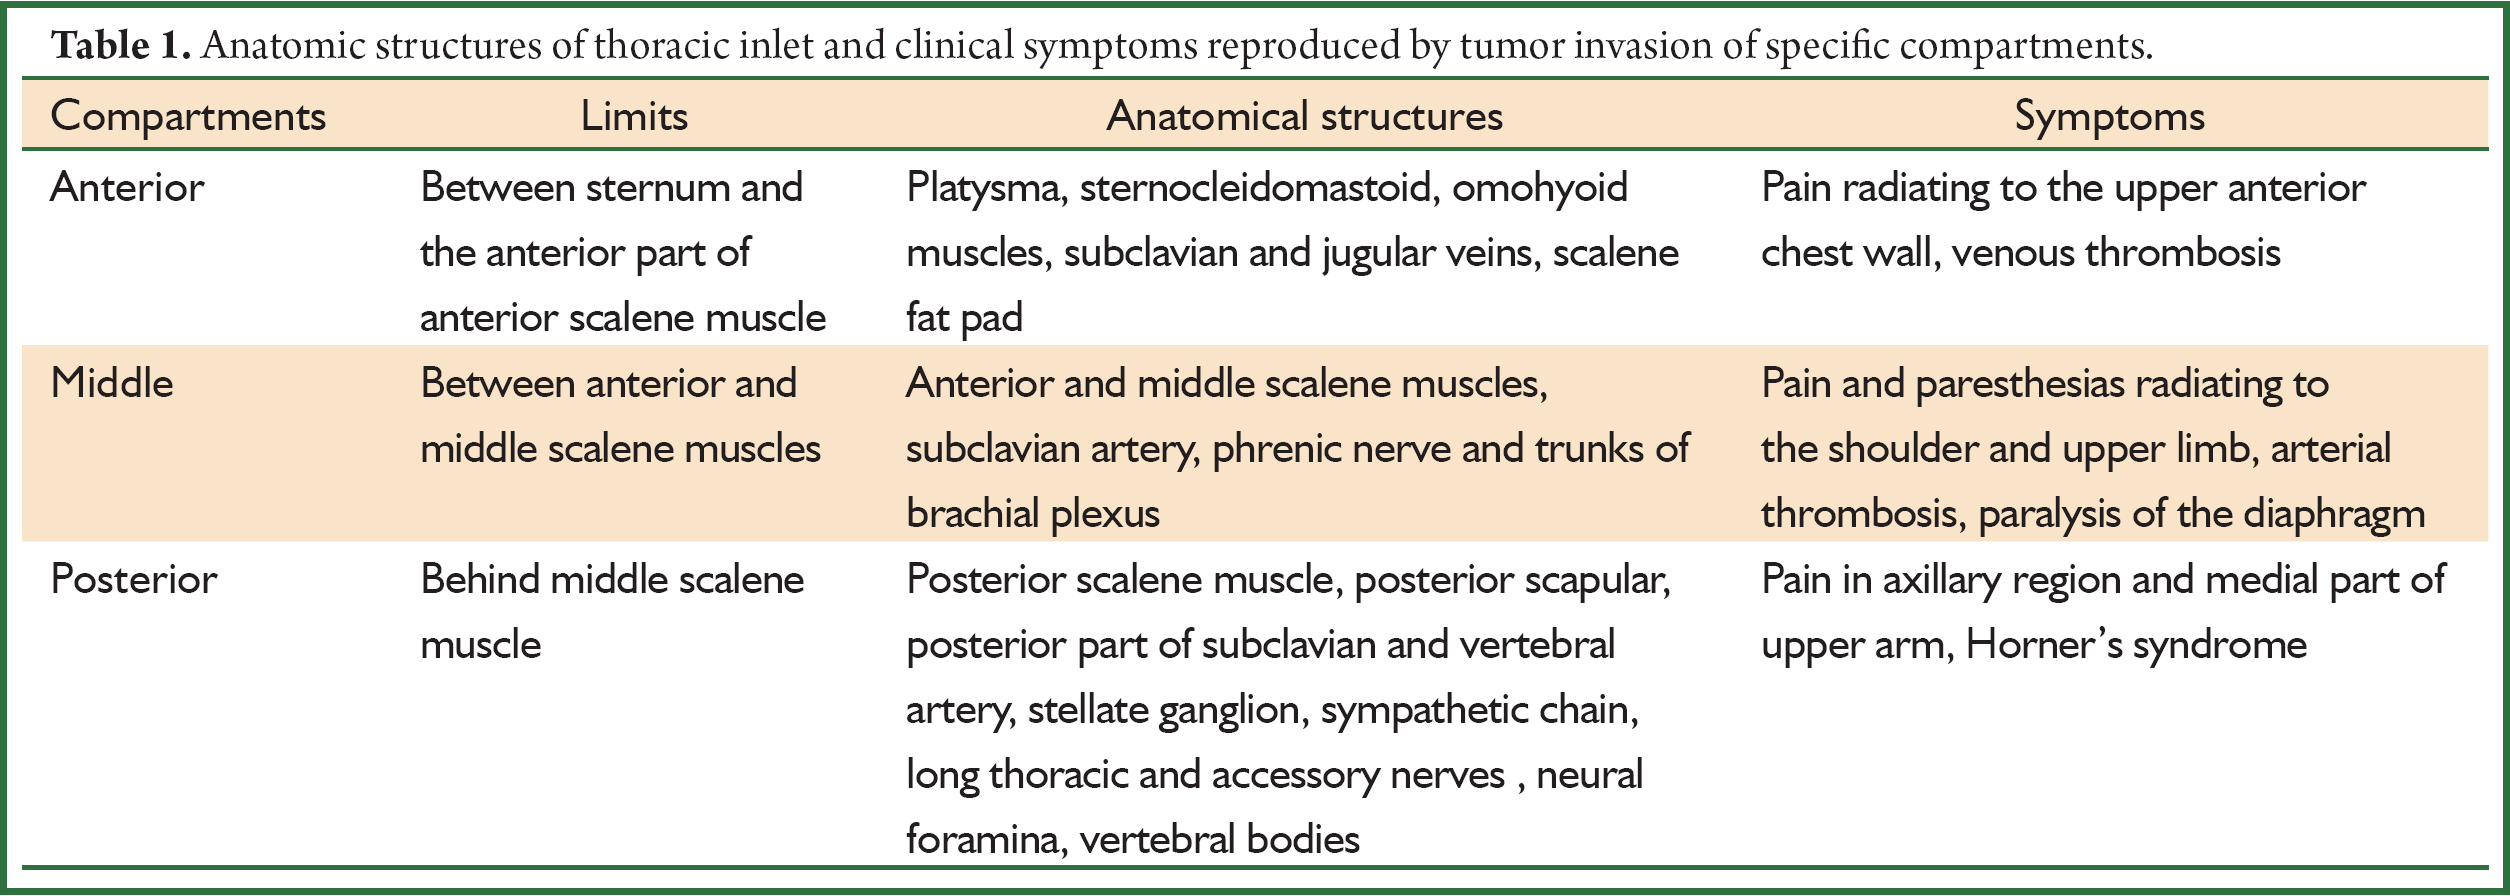 What symptoms are associated with a neoplasm?